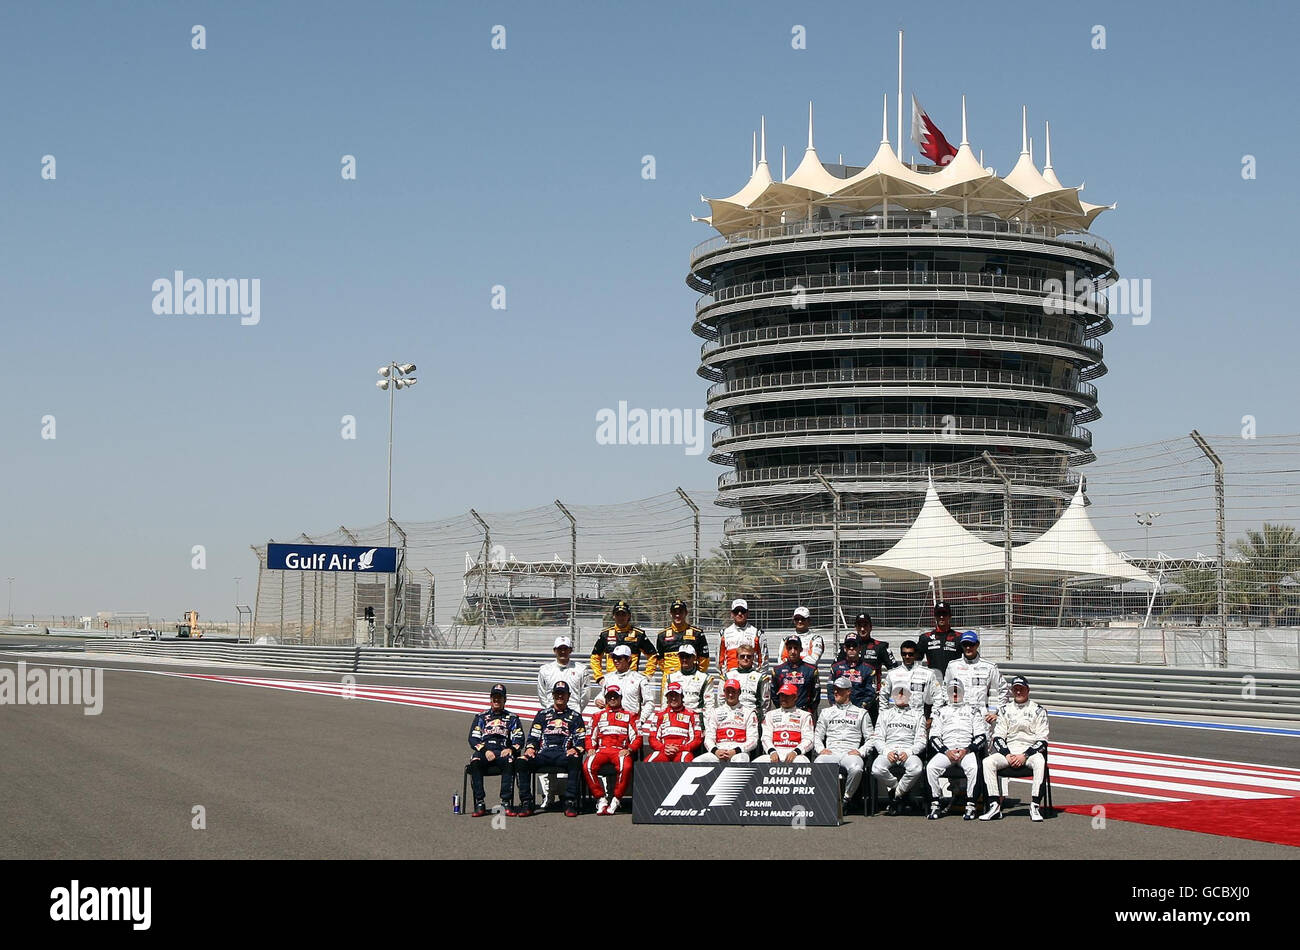 The drivers pose for the annual start of season team group picture prior to during the Gulf Air Bahrain Grand Prix at the Bahrain International Circuit in Sakhir, Bahrain. Stock Photo